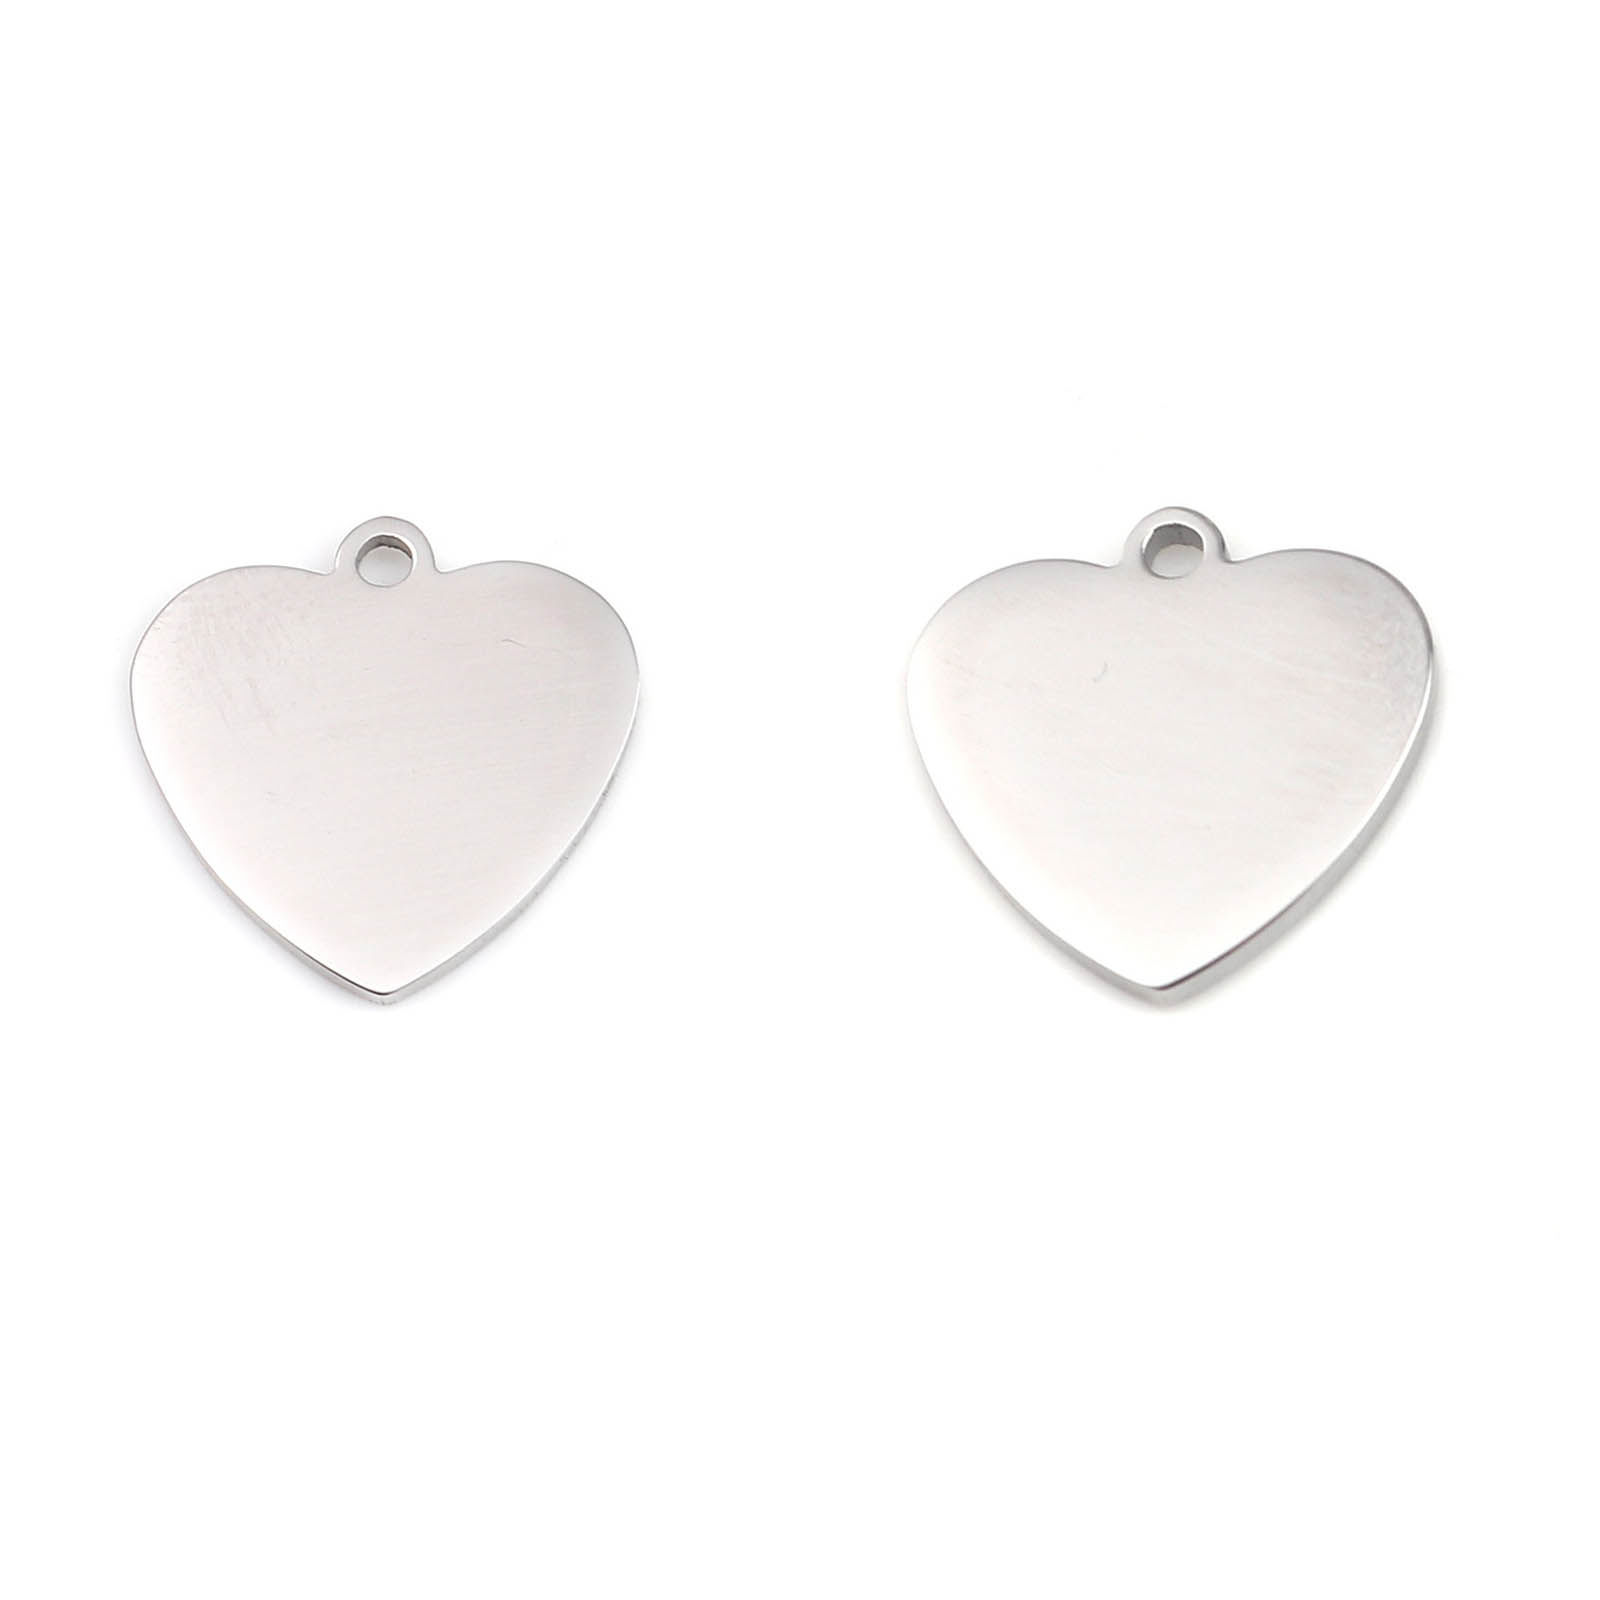 Picture of Stainless Steel Charms Heart Silver Tone Blank Stamping Tags 17mm x 17mm, 1 Piece